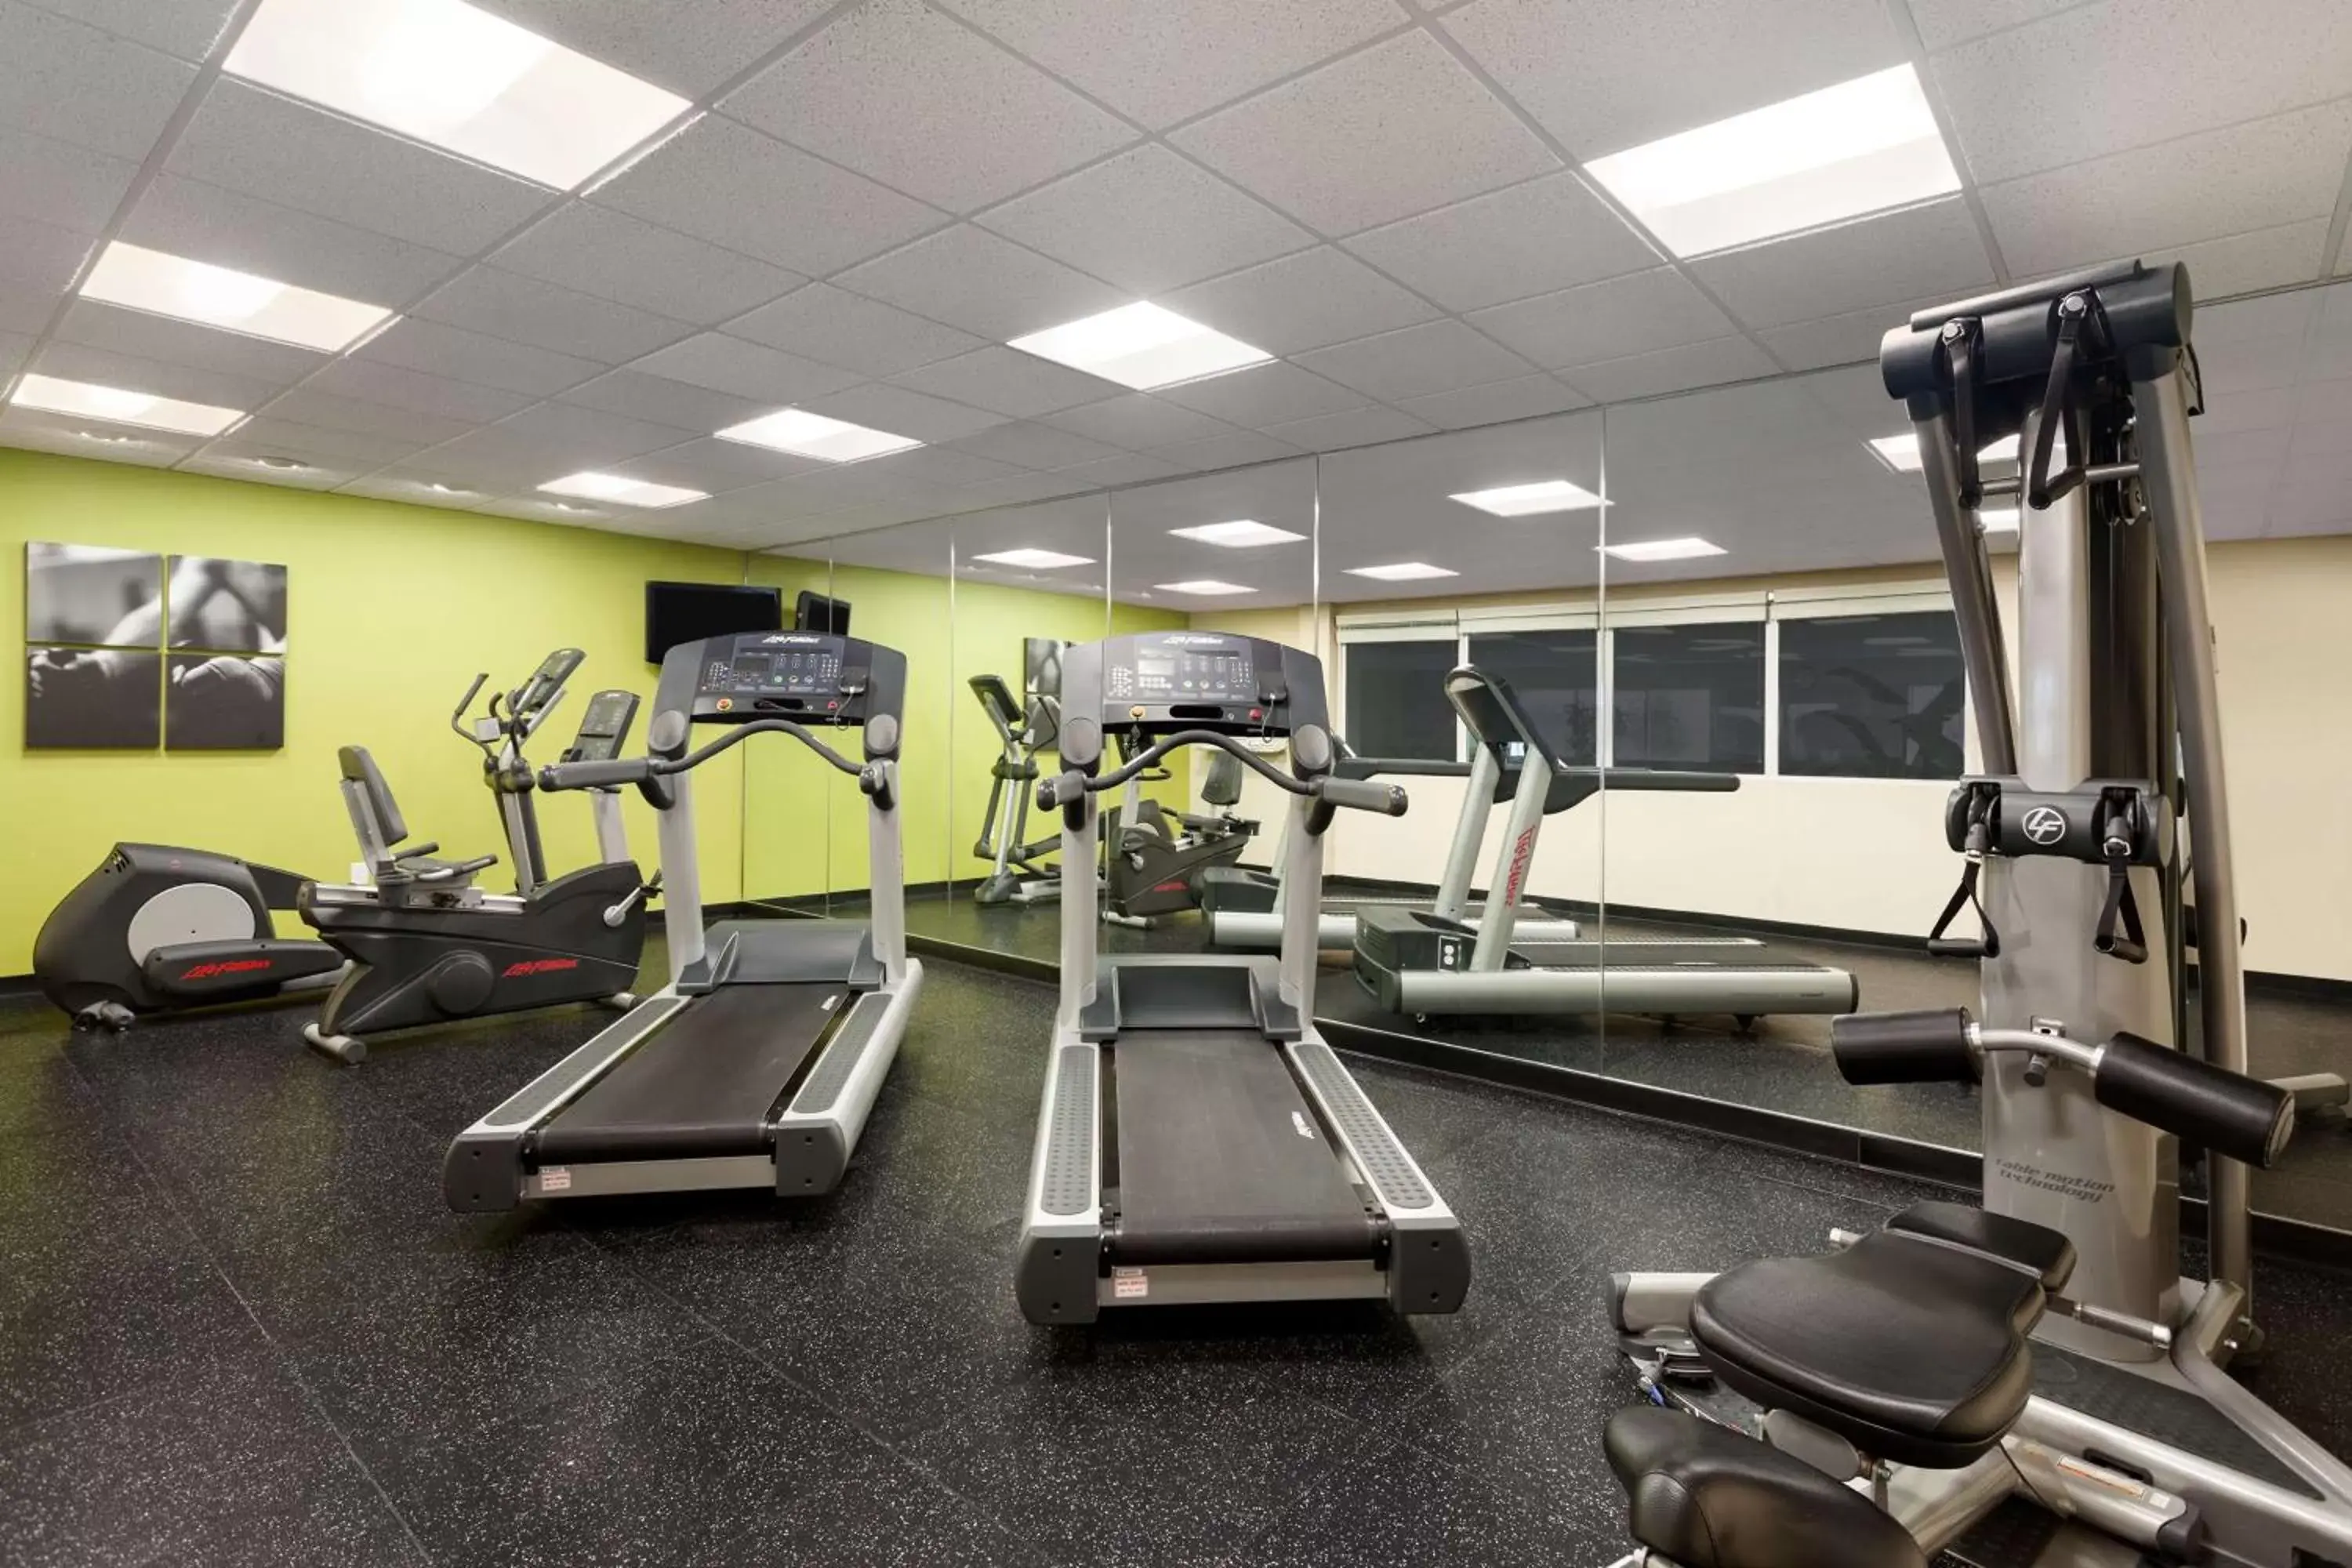 Activities, Fitness Center/Facilities in Country Inn & Suites Buffalo South I-90, NY